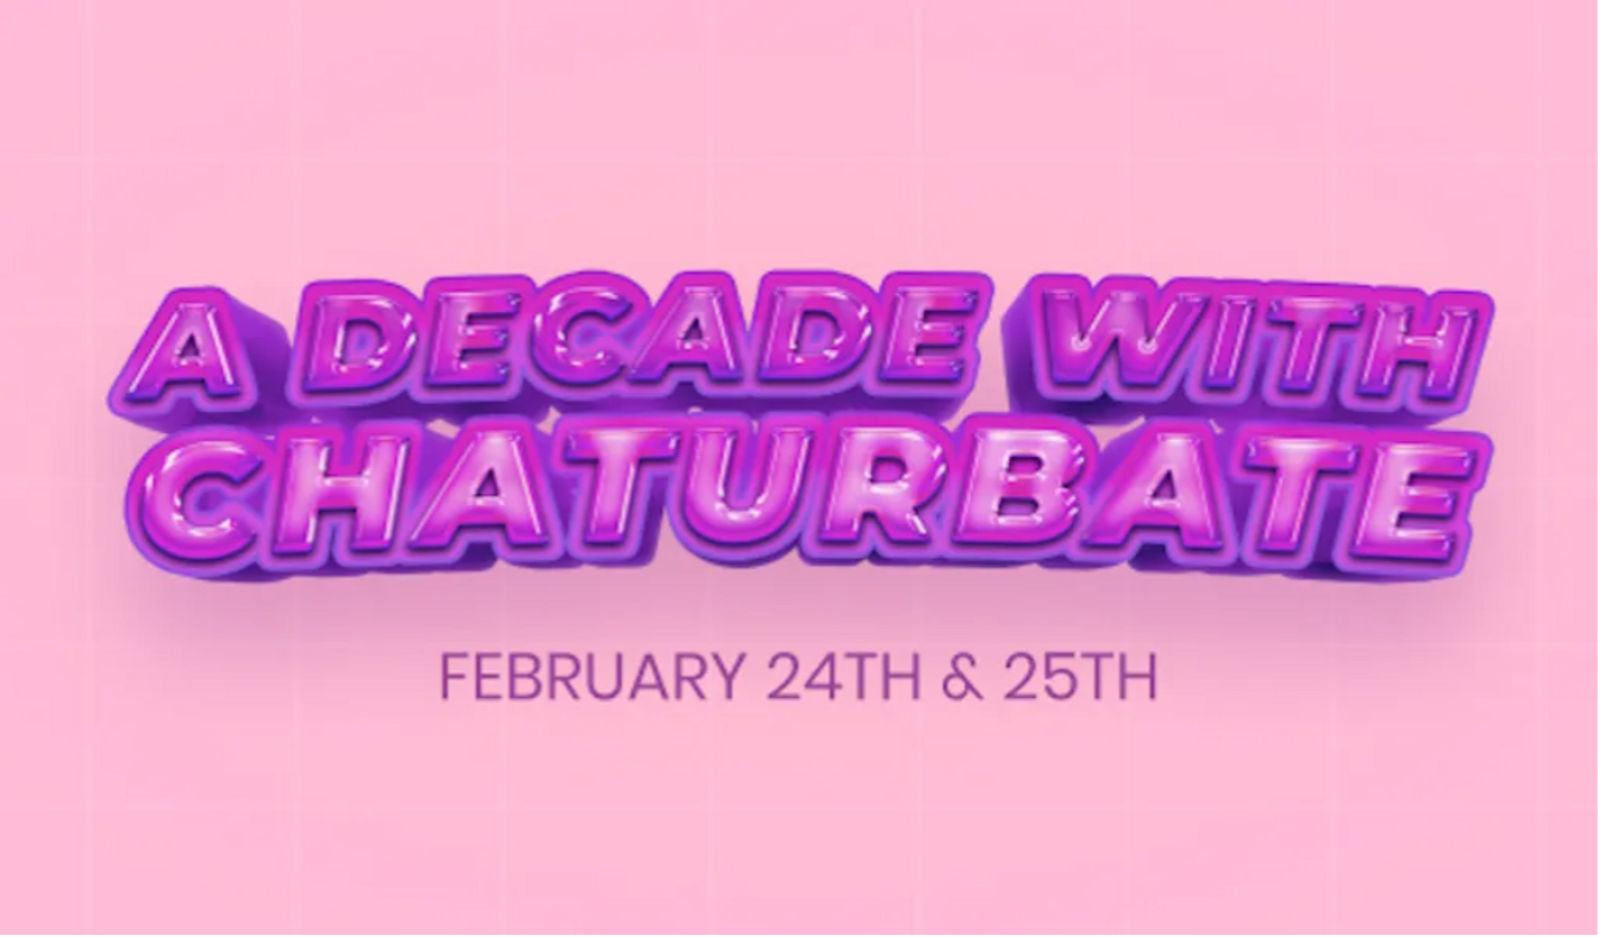 Chaturbate Announces Details of 10-Year Anniversary Event